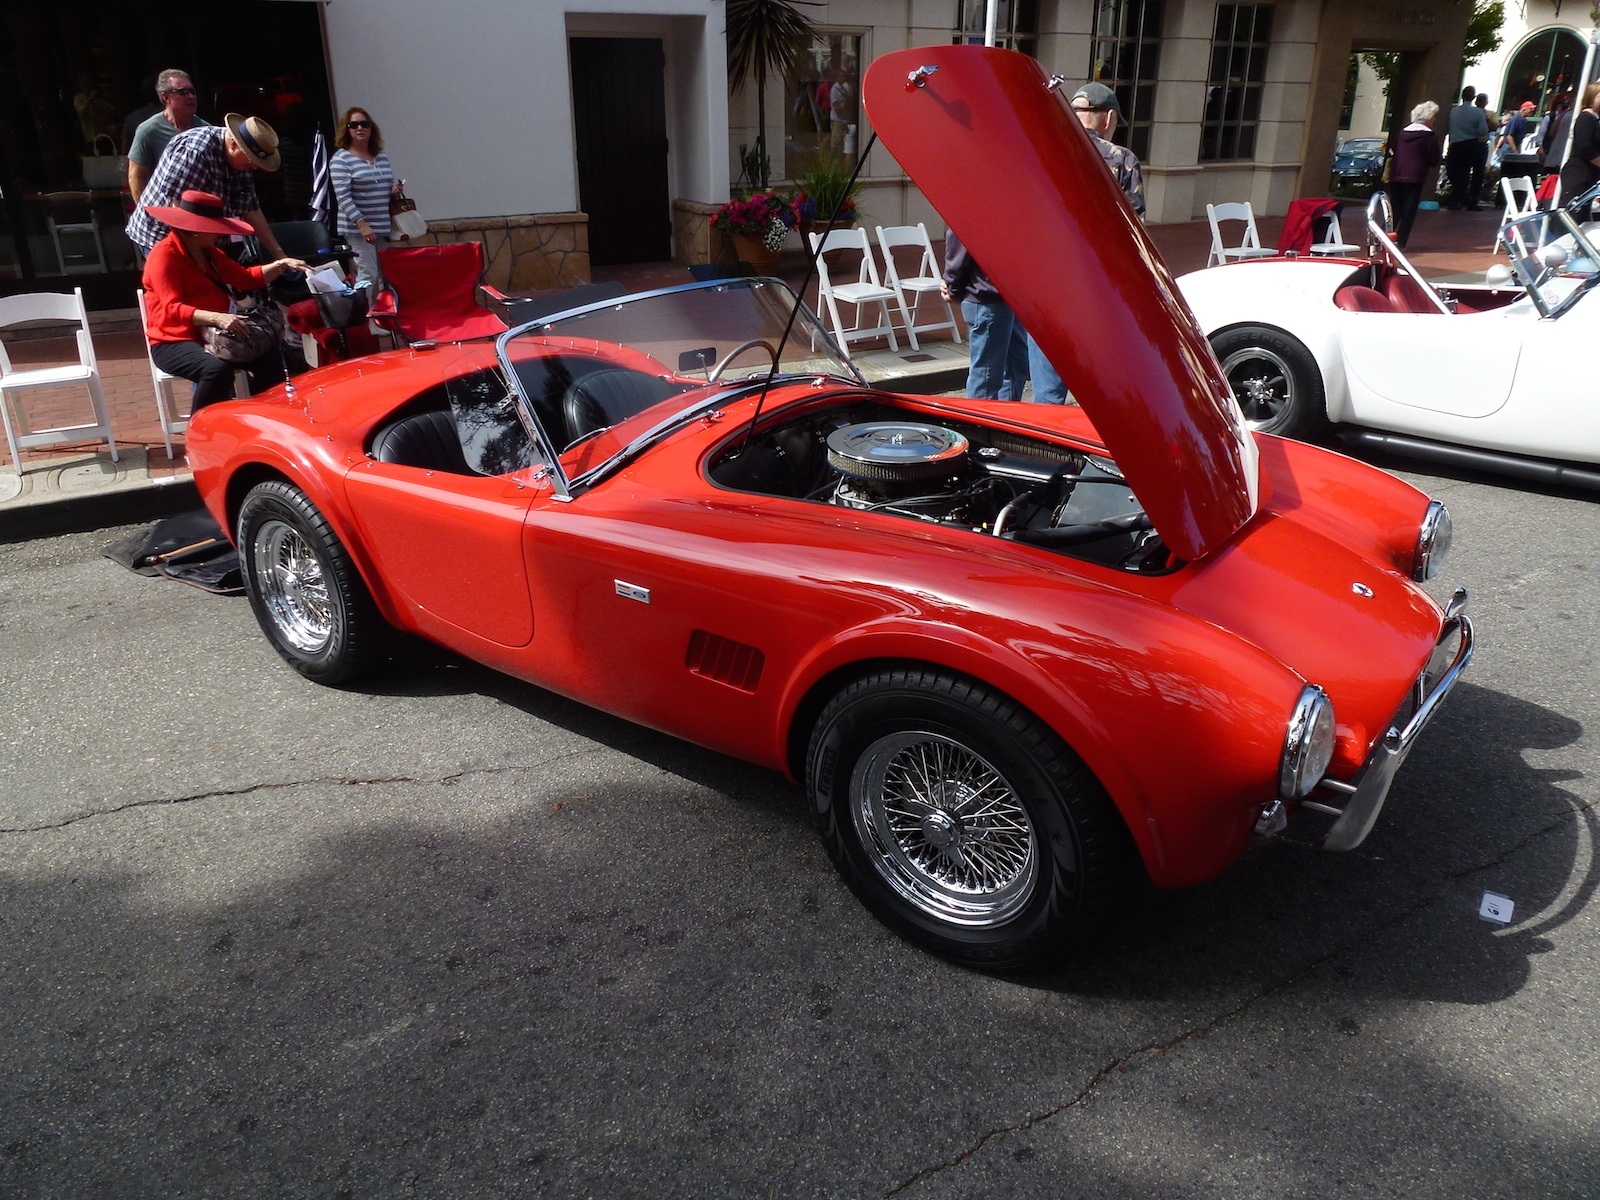 What Could Be Better Than Classic Cars In Carmel?